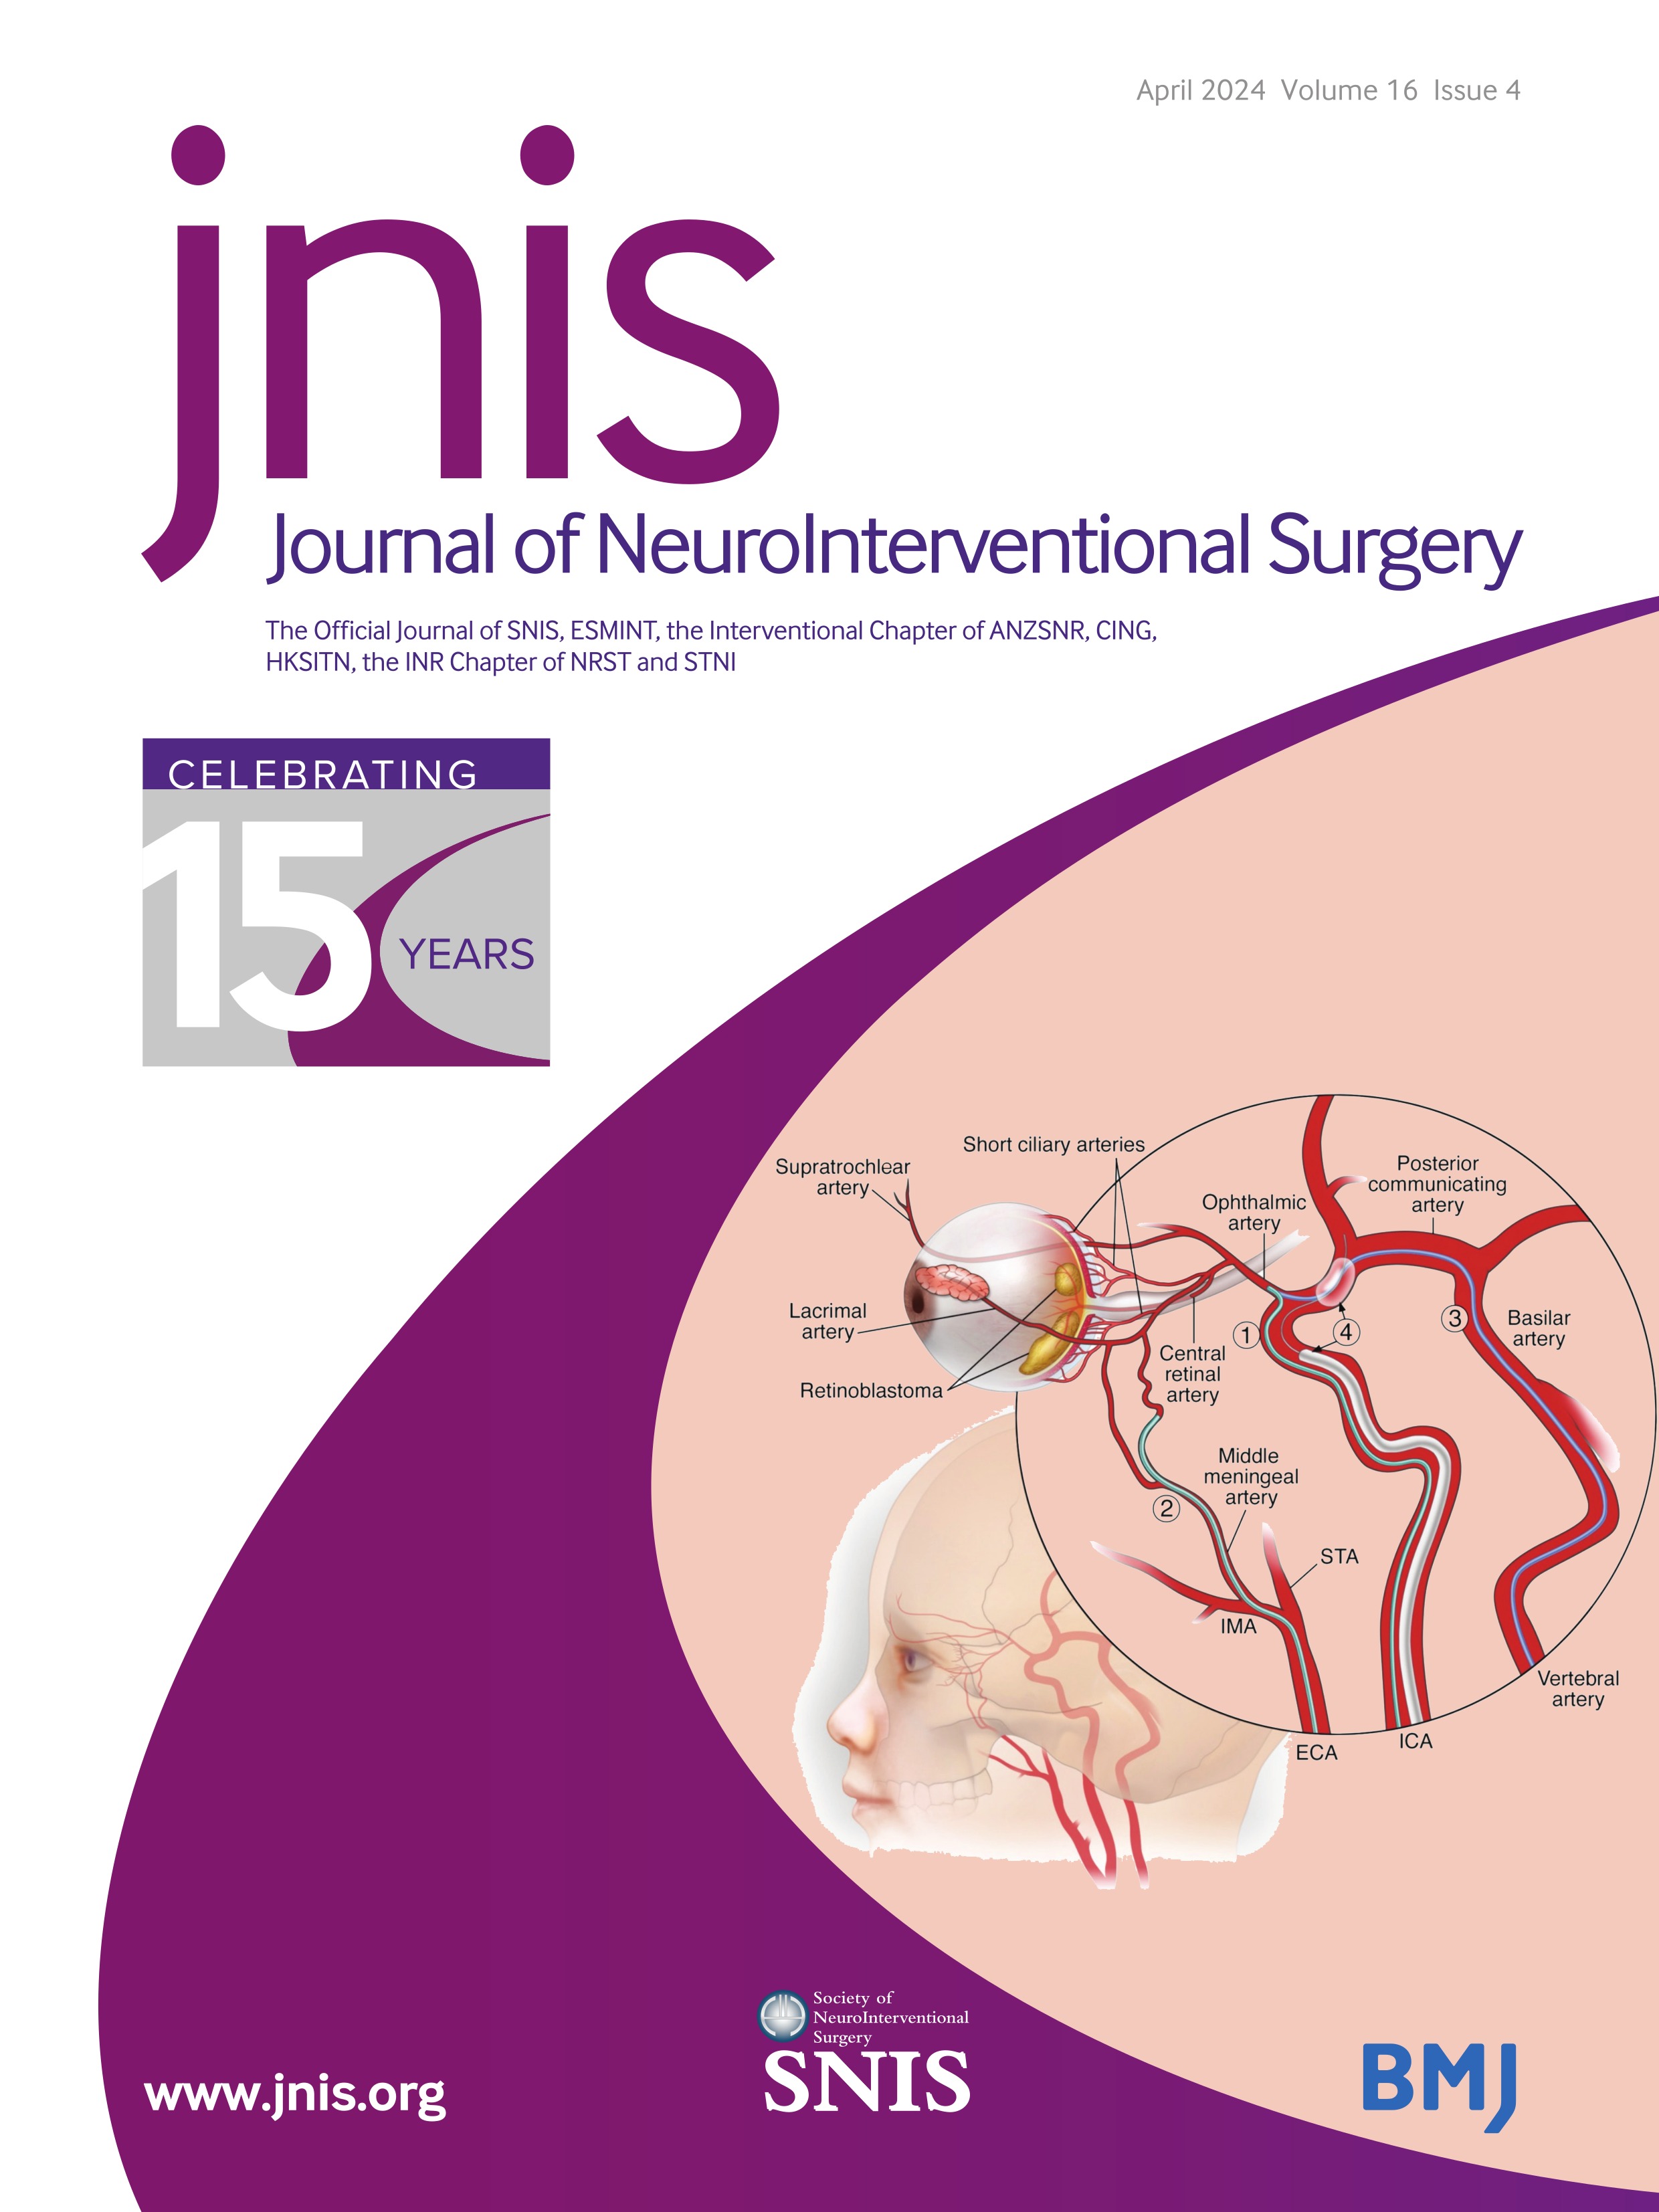 Correspondence on 'Cerebral aneurysms: Germany-wide real-world outcome data of endovascular or neurosurgical treatment from 2007 to 2019 by Haverkamp et al